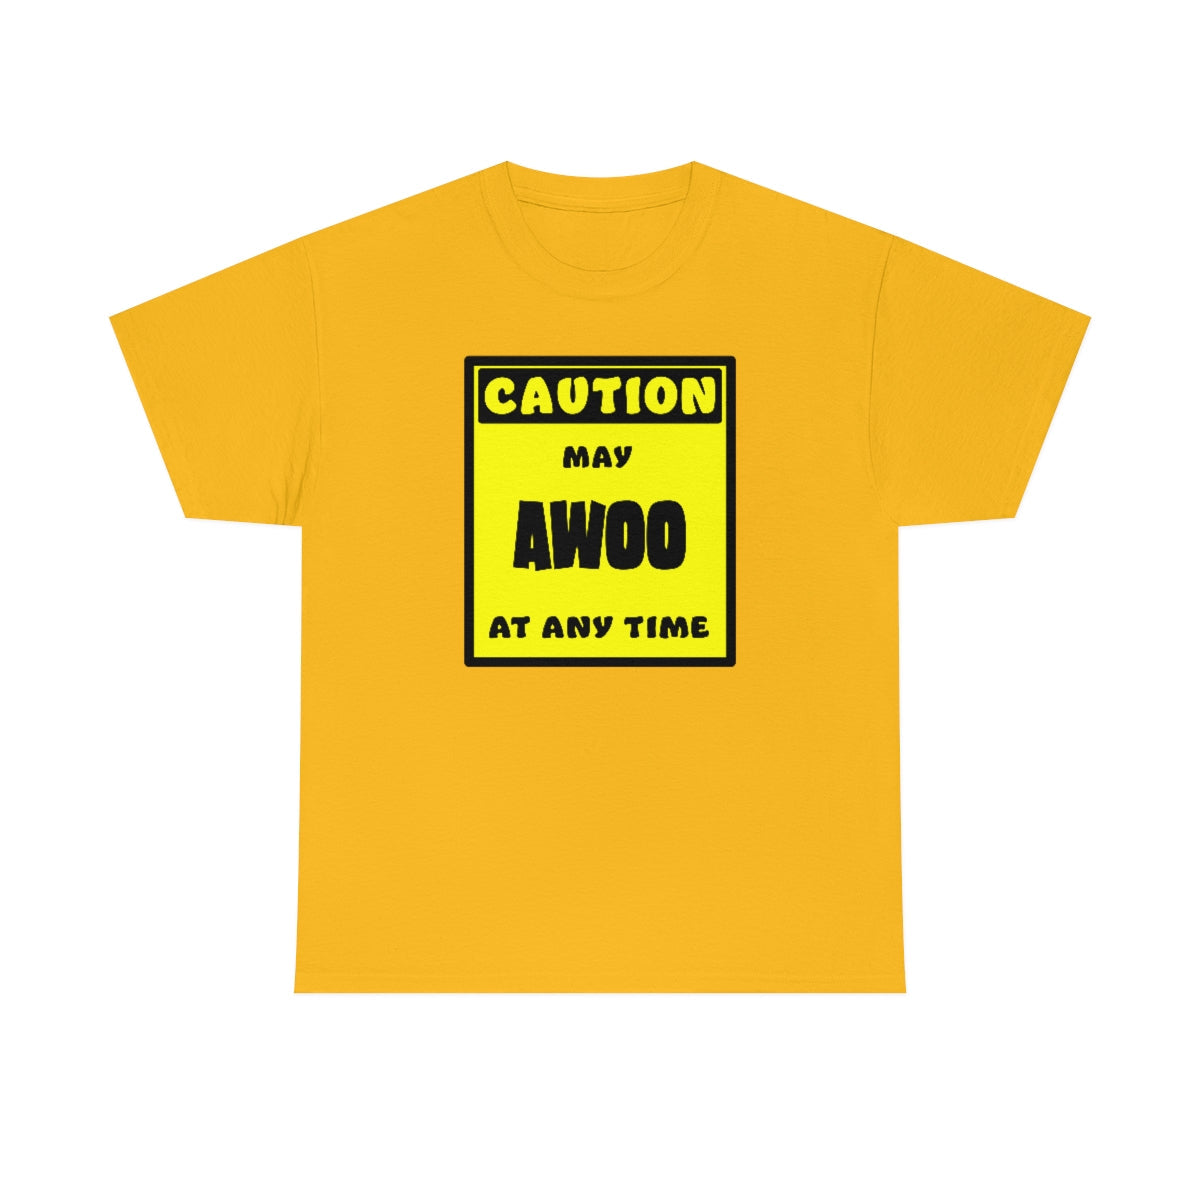 CAUTION! May AWOO at any time! - T-Shirt T-Shirt AFLT-Whootorca Gold S 